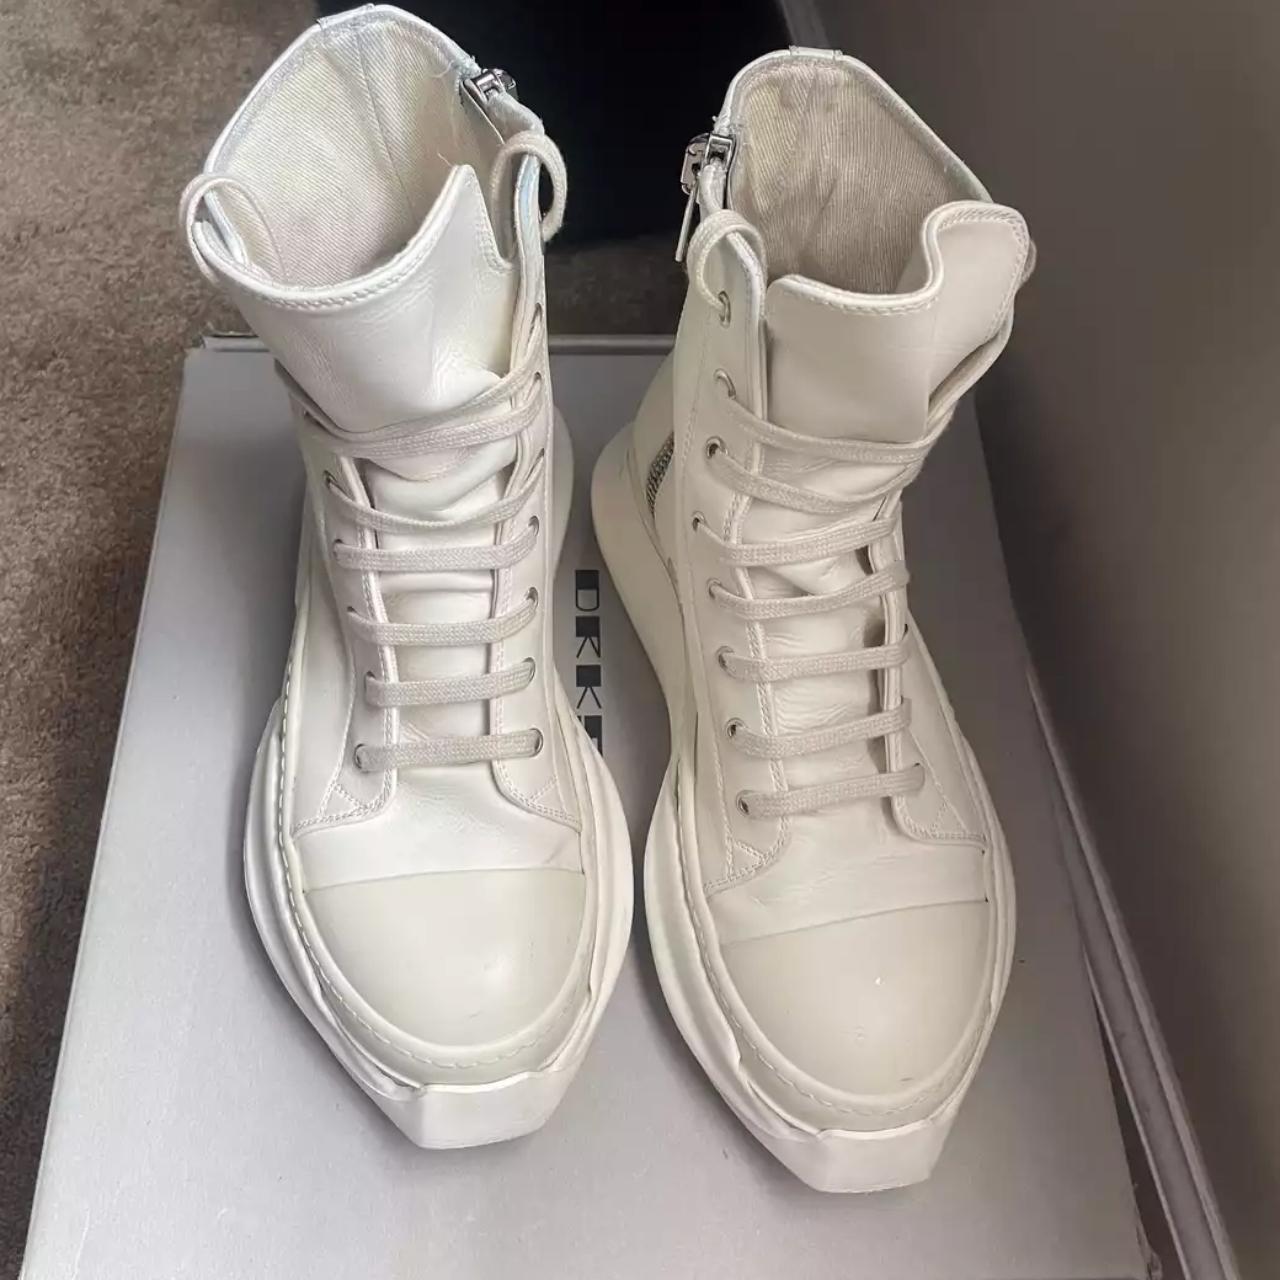 Rick Owens DRKSHDW Men's Cream and White Trainers | Depop